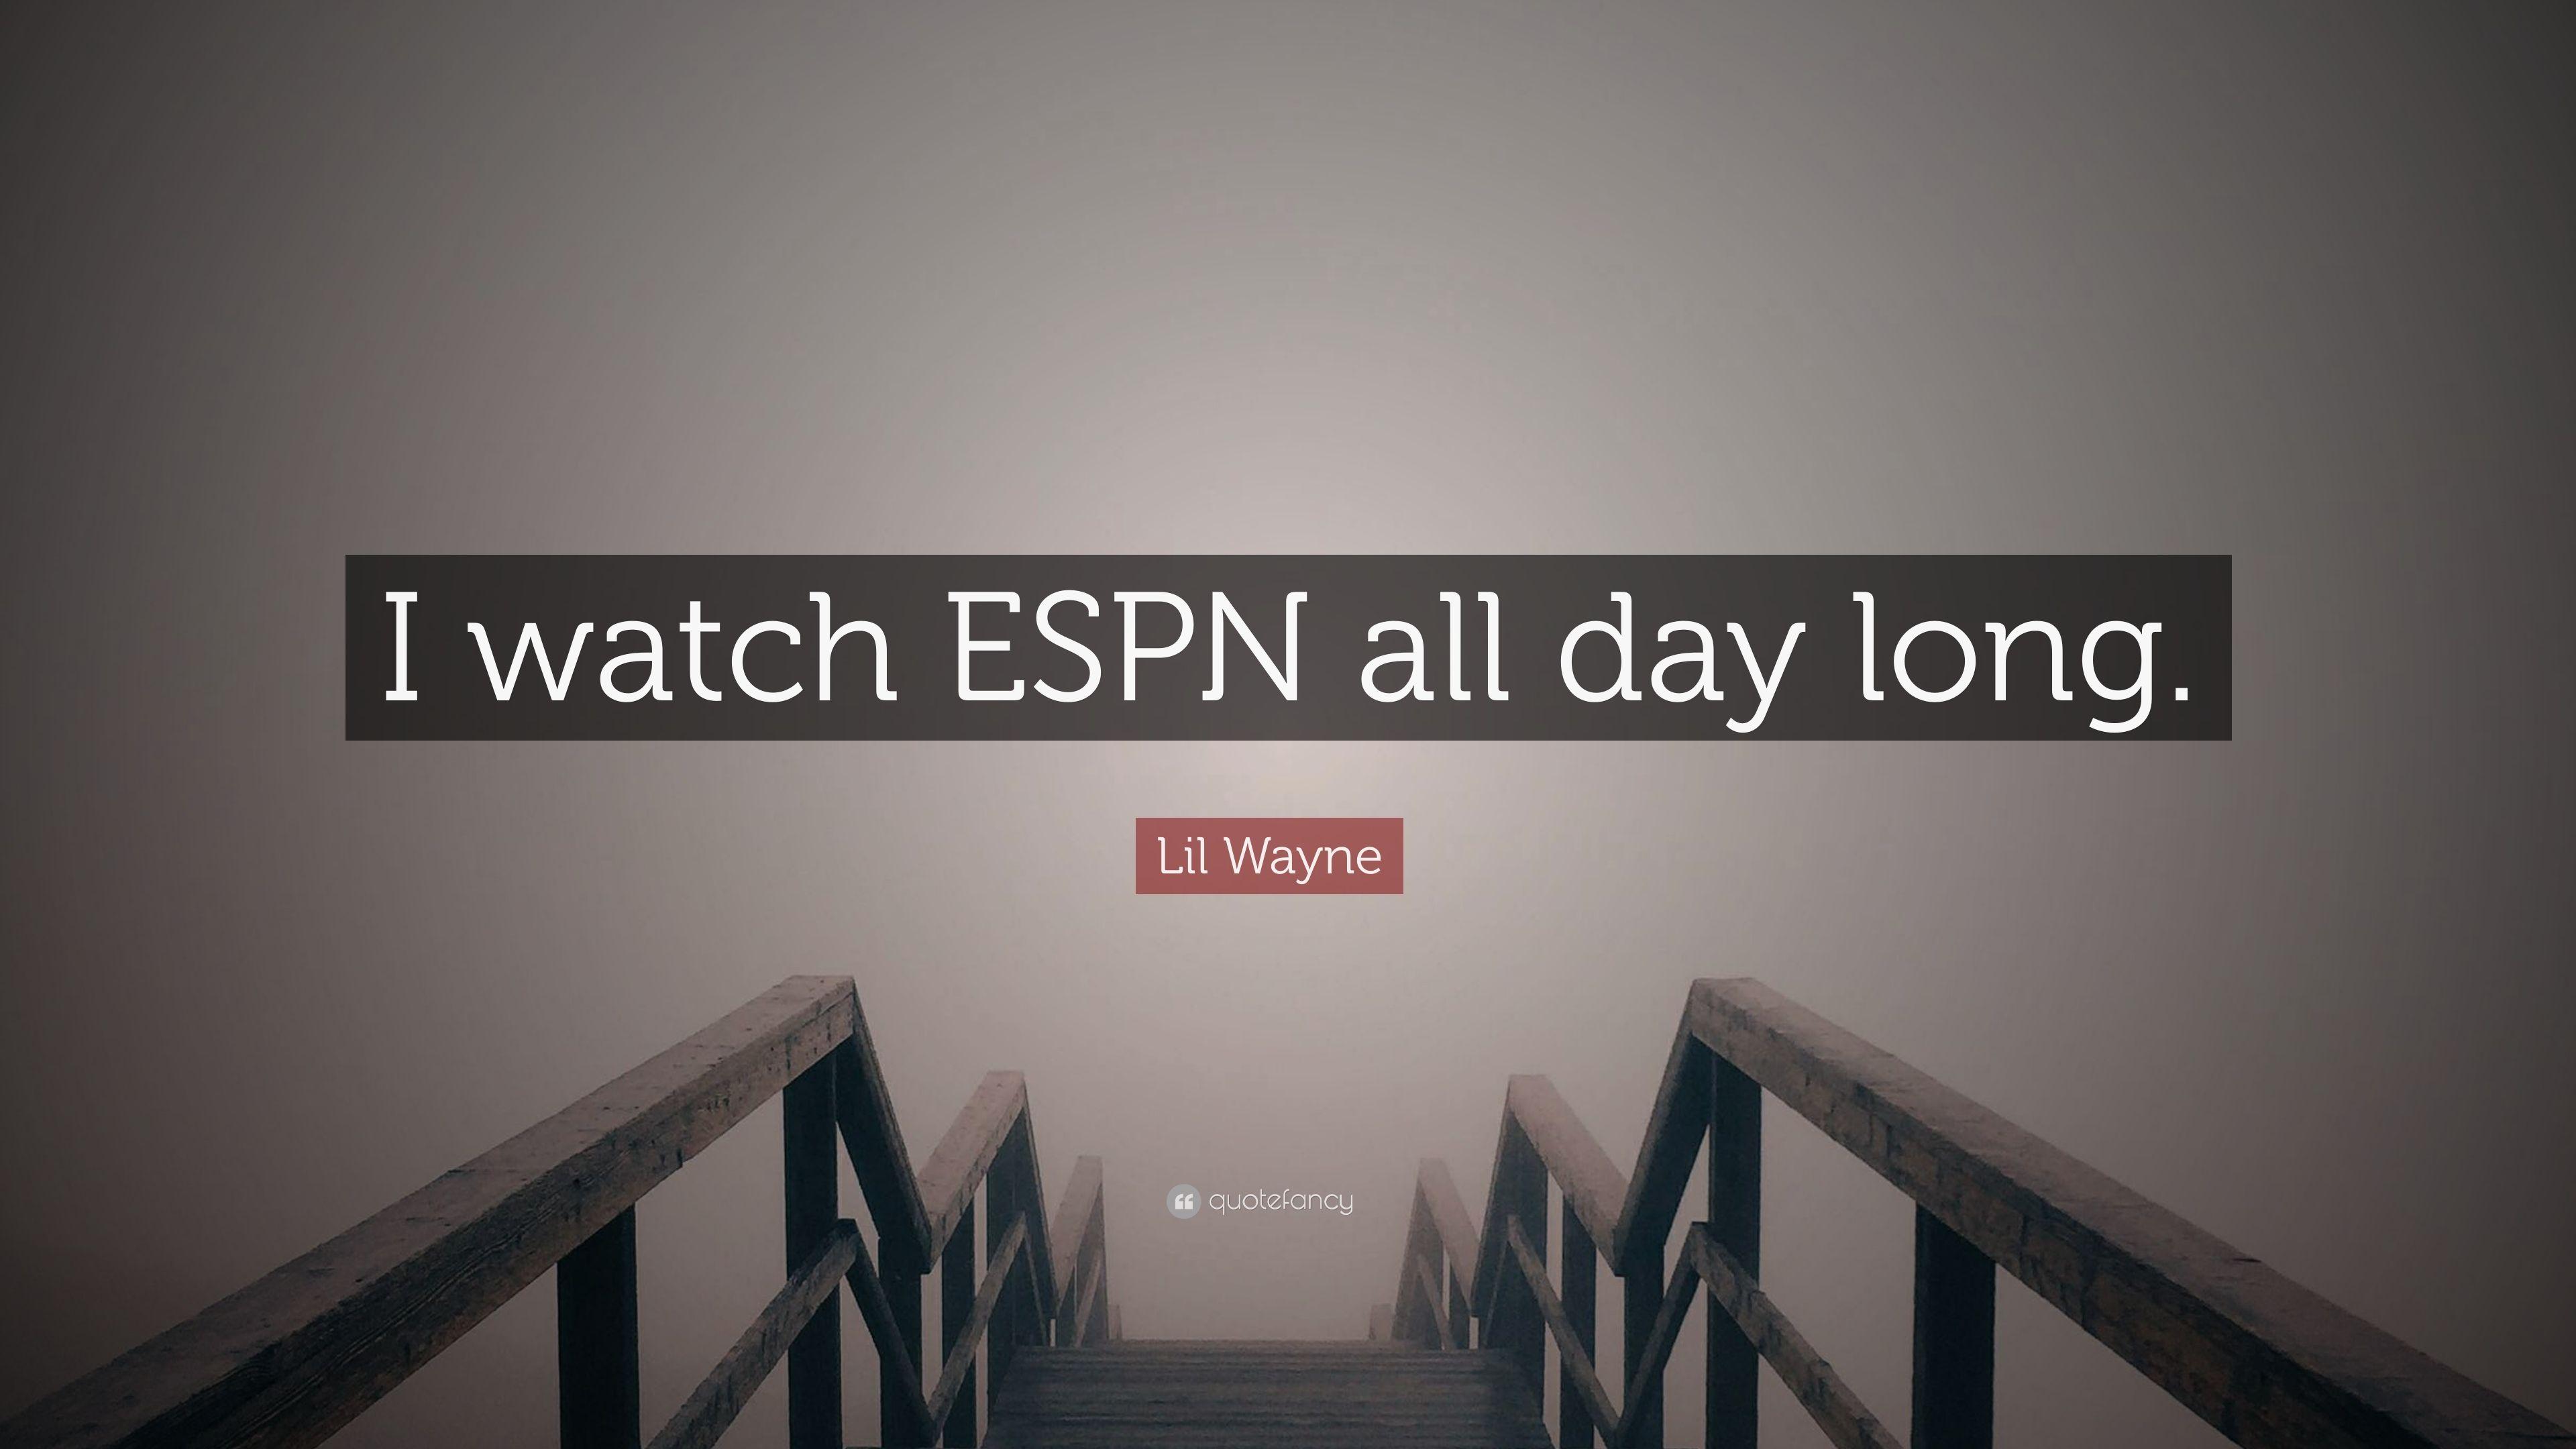 Lil Wayne Quote: “I watch ESPN all day long.” 7 wallpaper